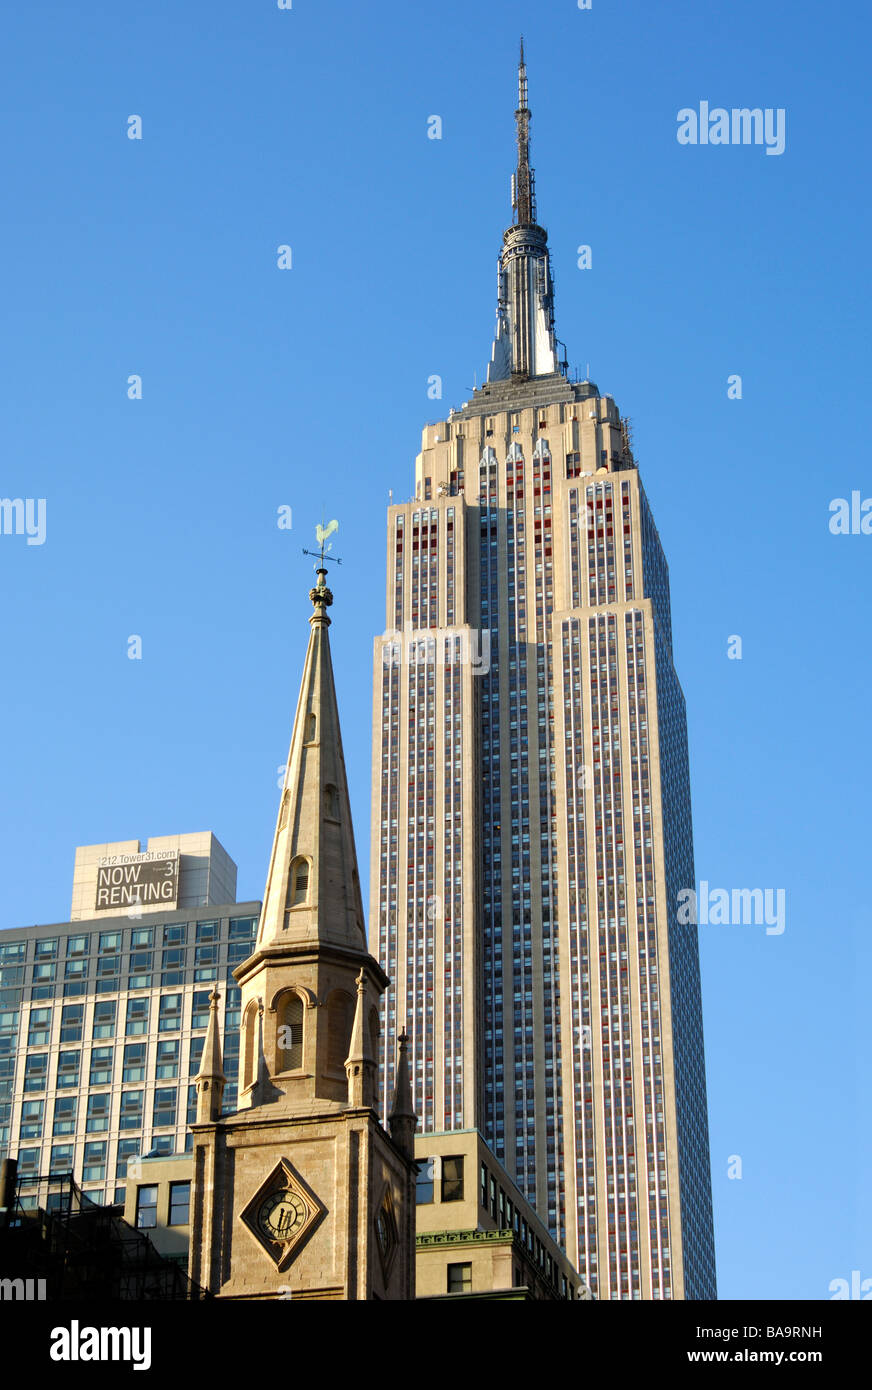 State Empire Building behind church spire, high rise Tower 31 on the left, Manhattan, New York, USA Stock Photo